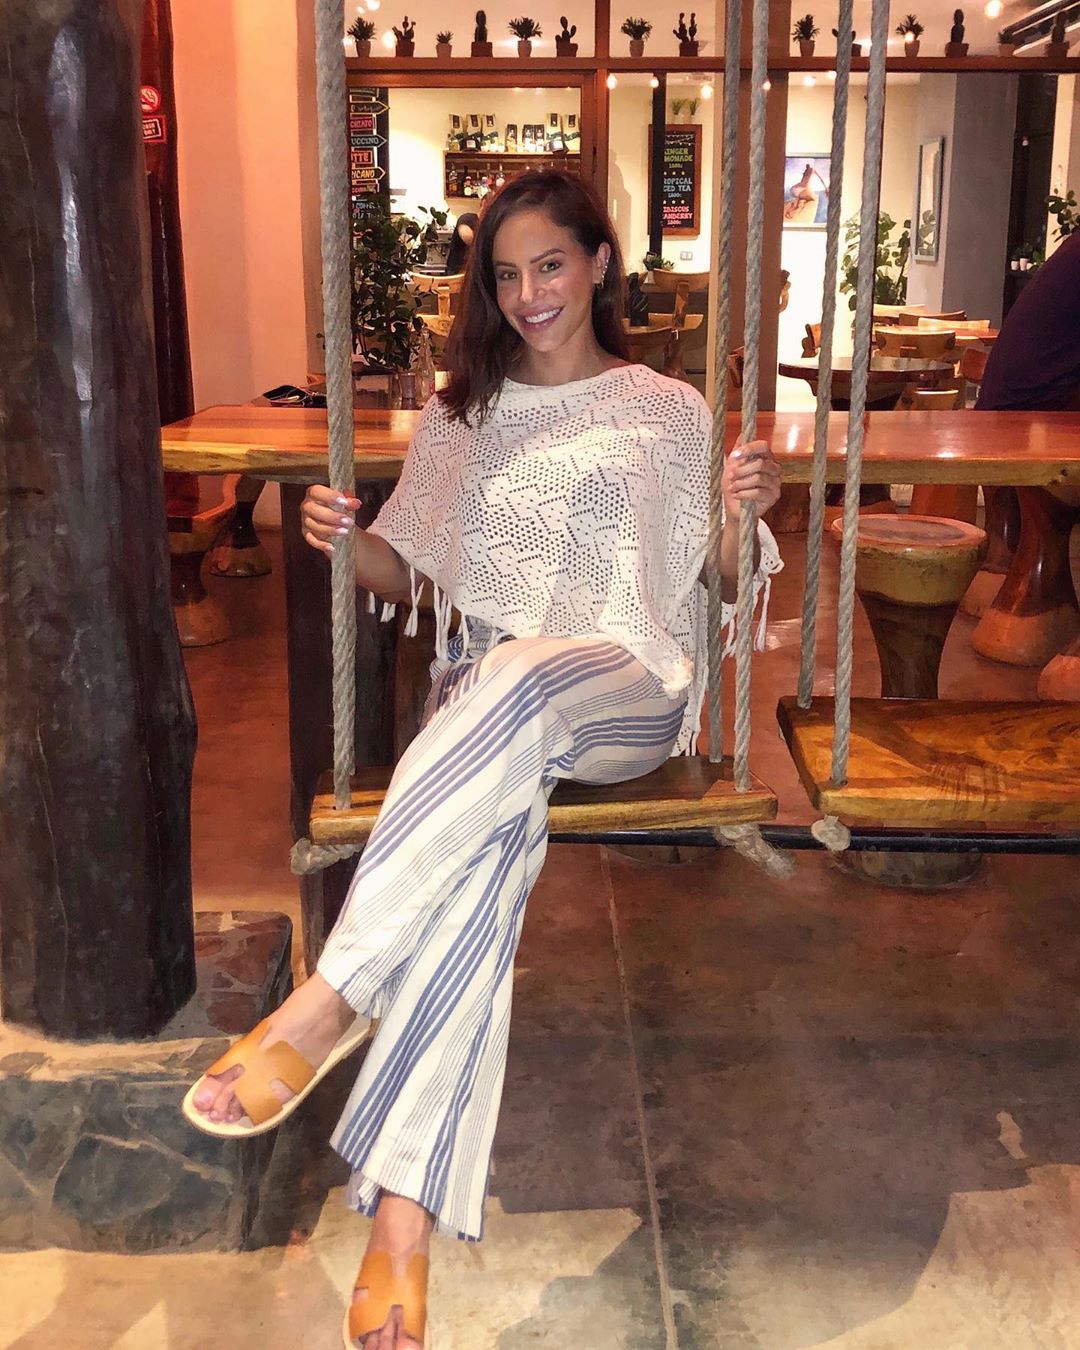 Charly caruso feet